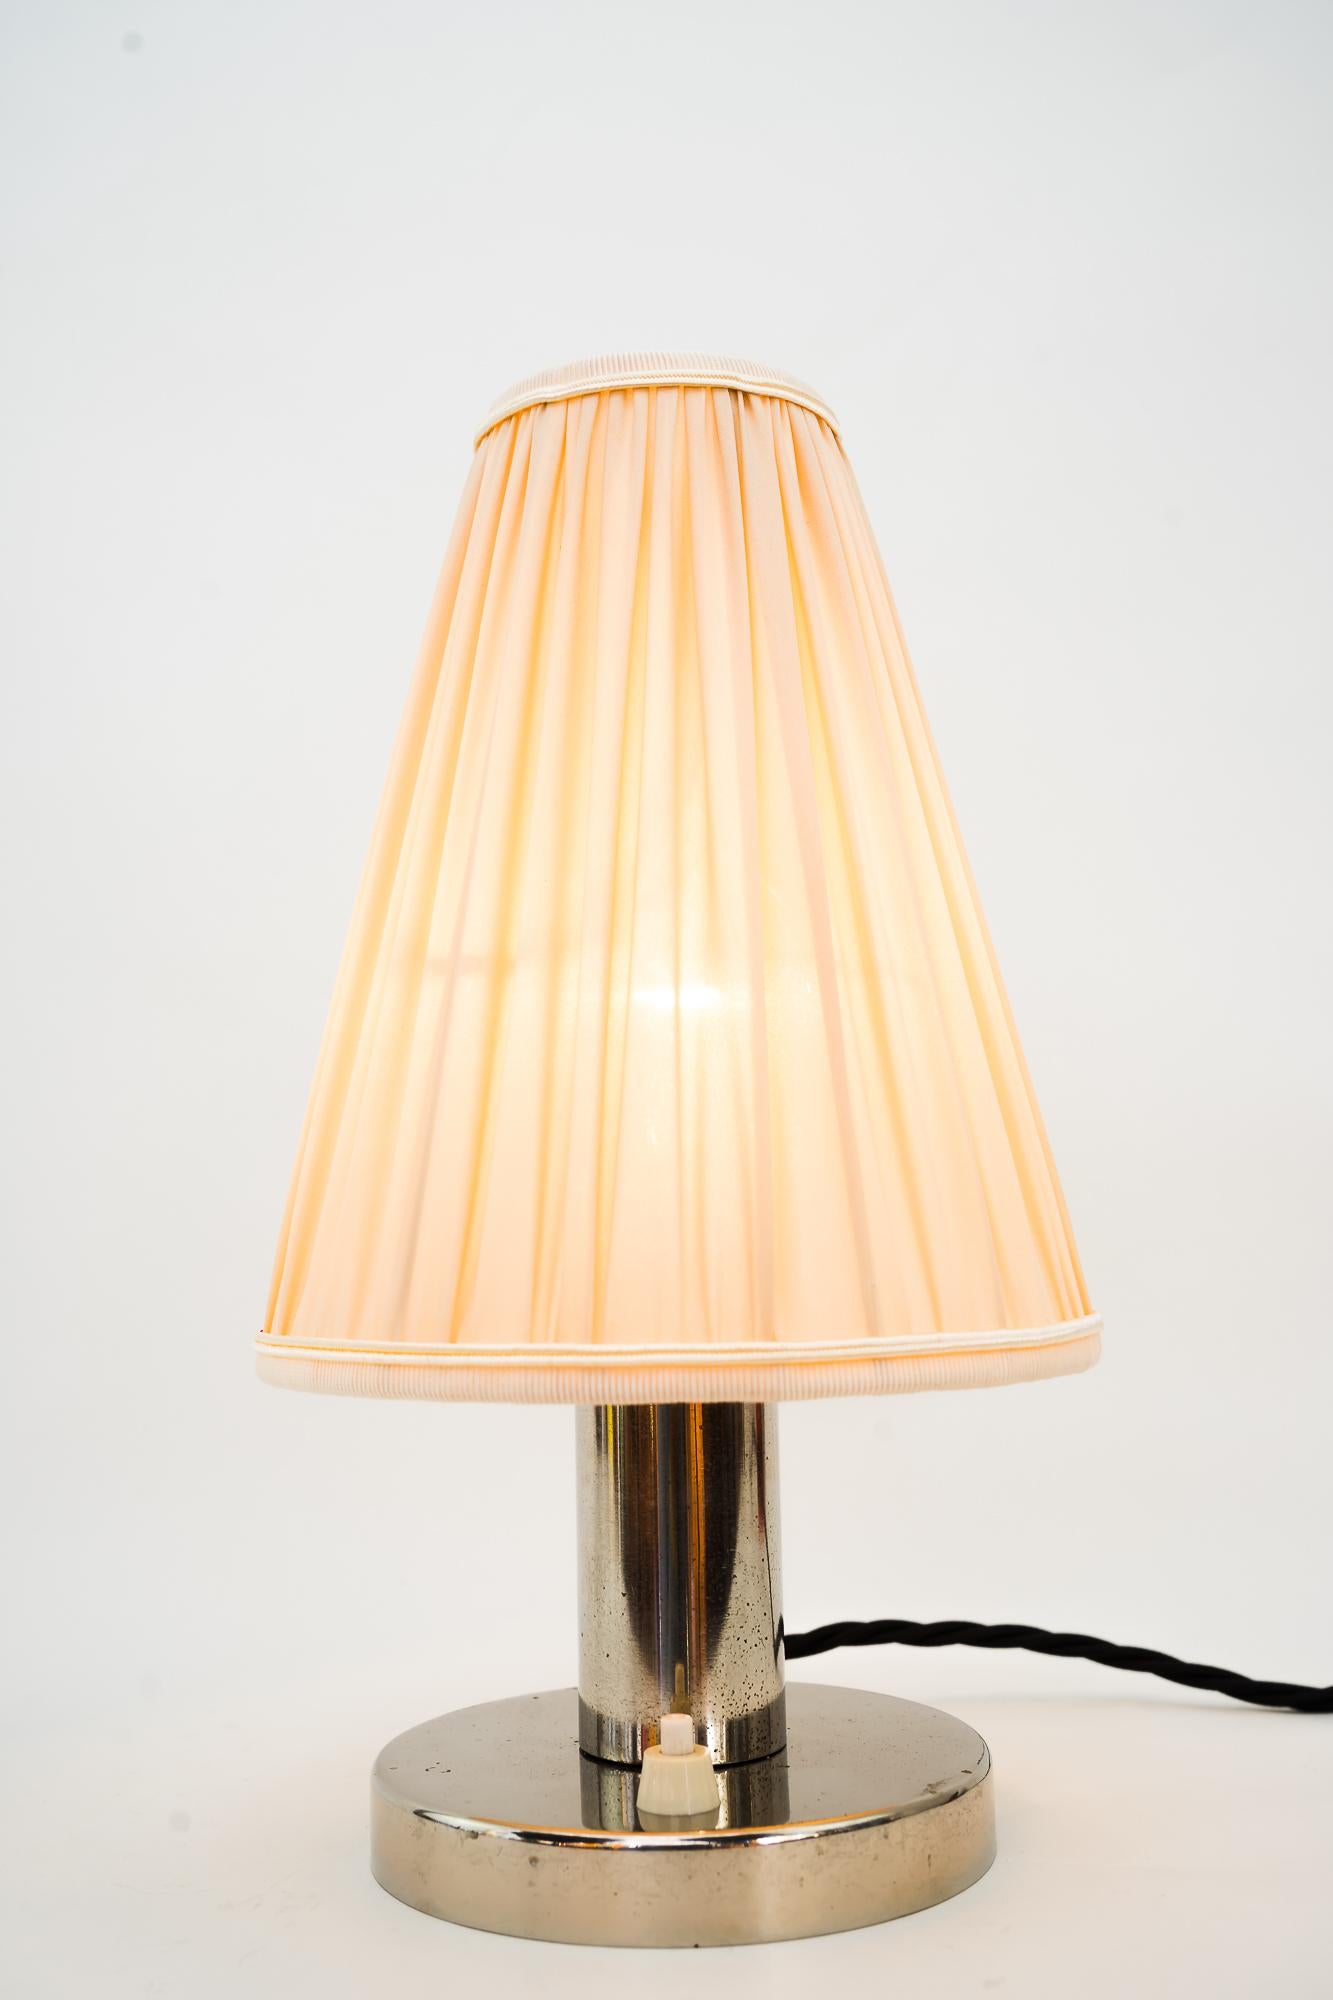 Nickel Art Deco table lamp vienna around 1920s
Original condition
Shade is replaced ( new ).